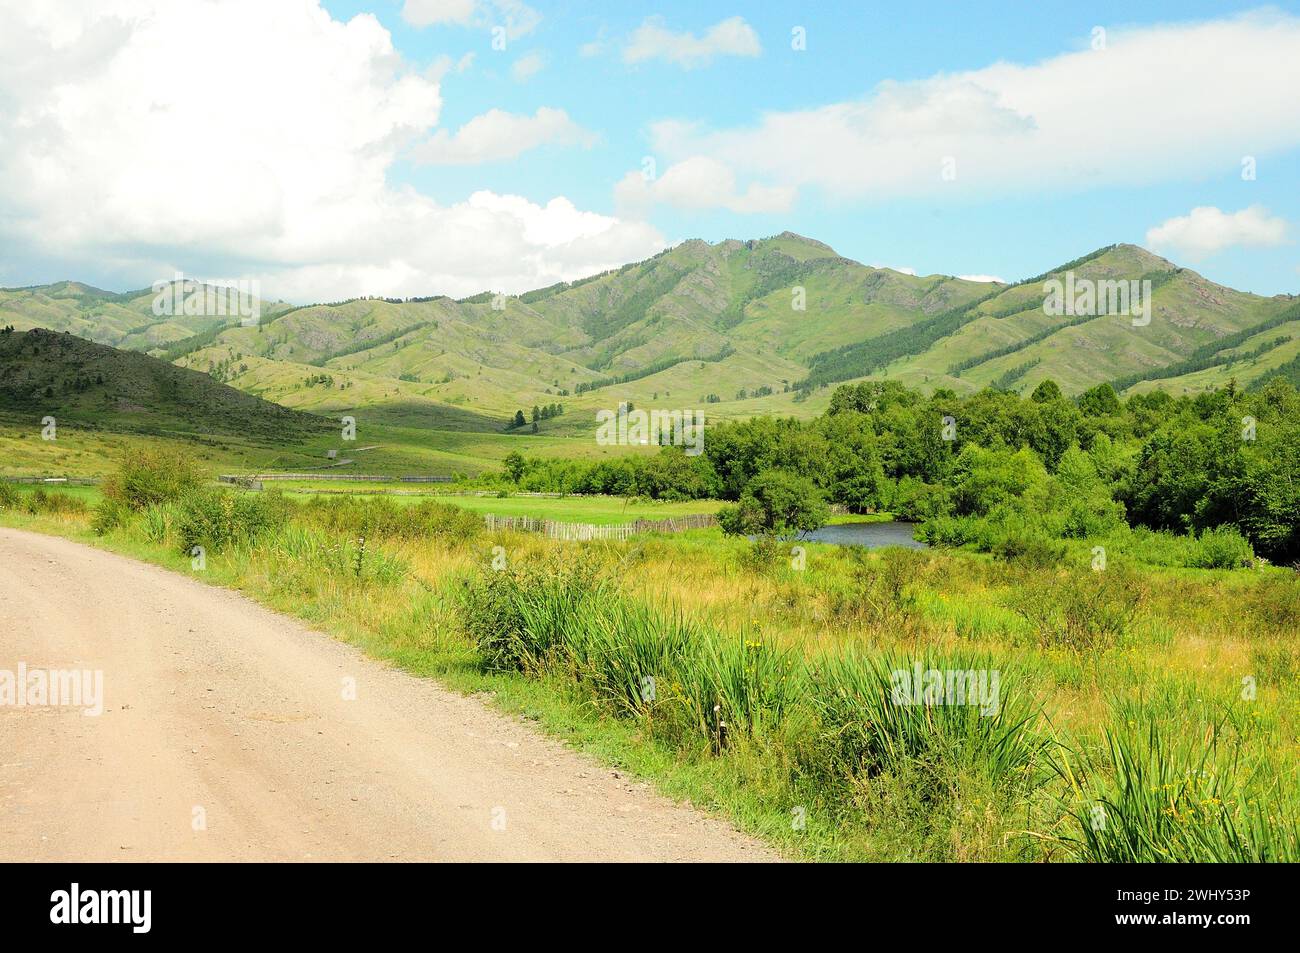 A fragment of a field gravel road running through a valley overgrown with low bushes at the foot of a mountain range on a clear summer day. Khakassia, Stock Photo